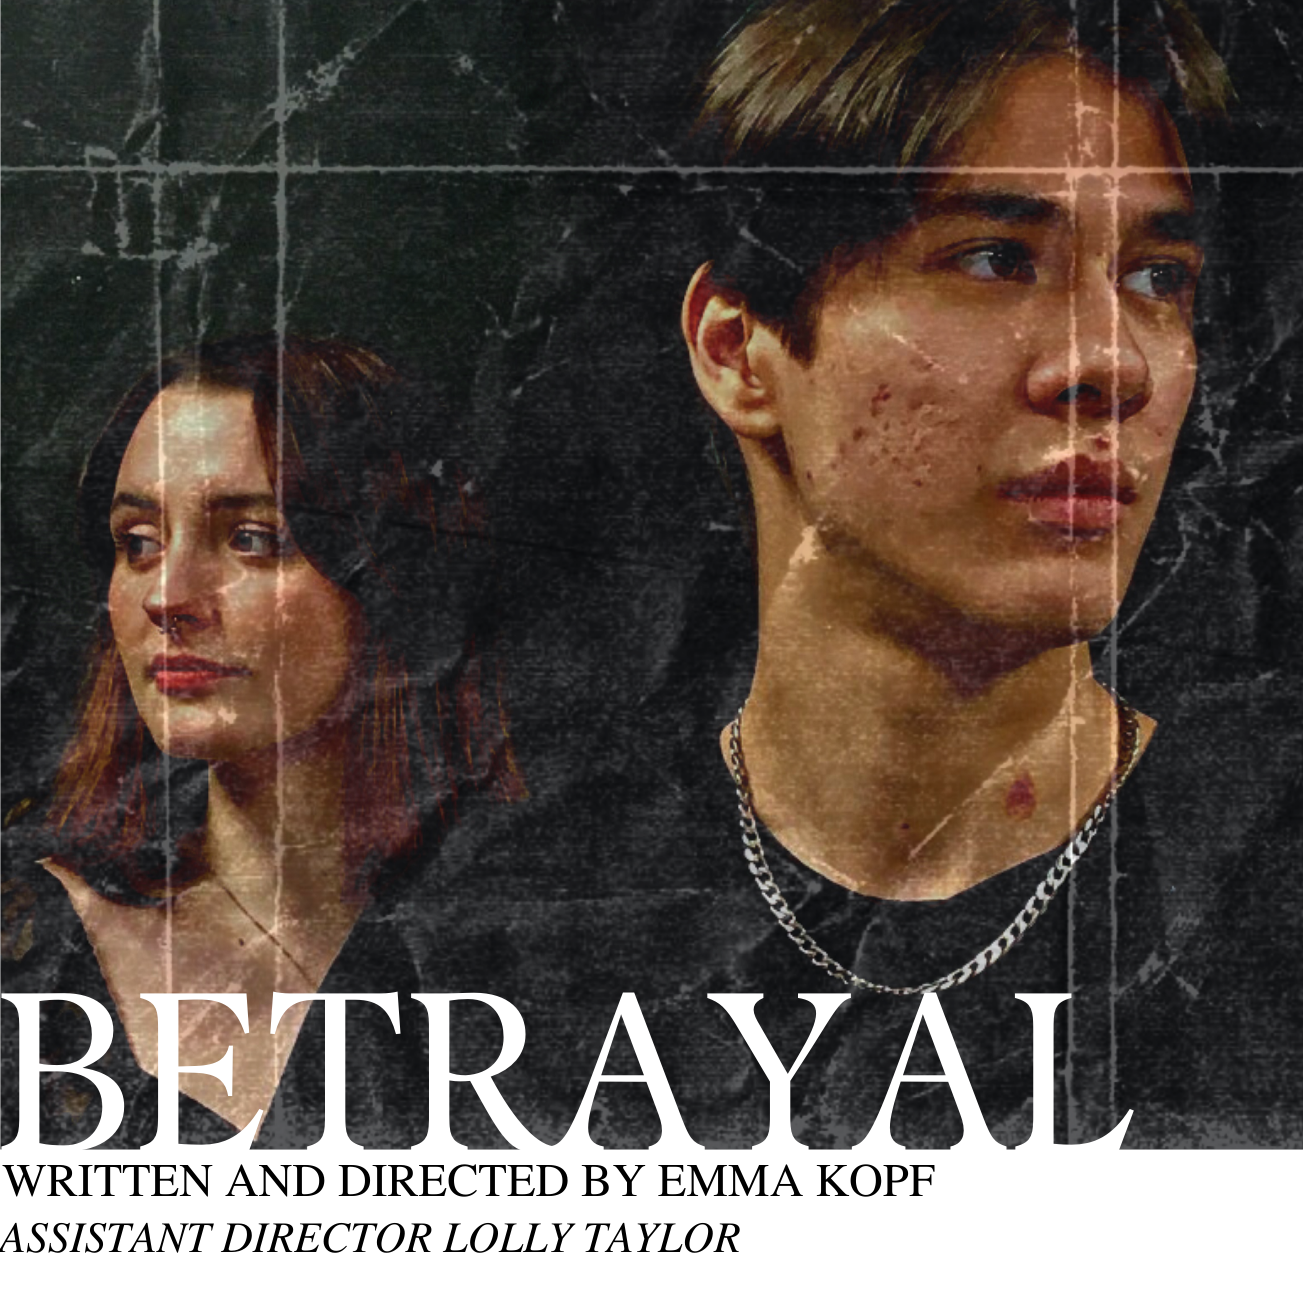 Promotional poster for the play Betrayal. Featuring a young woman in the background looking to the left and a young man in the foreground looking to the right.